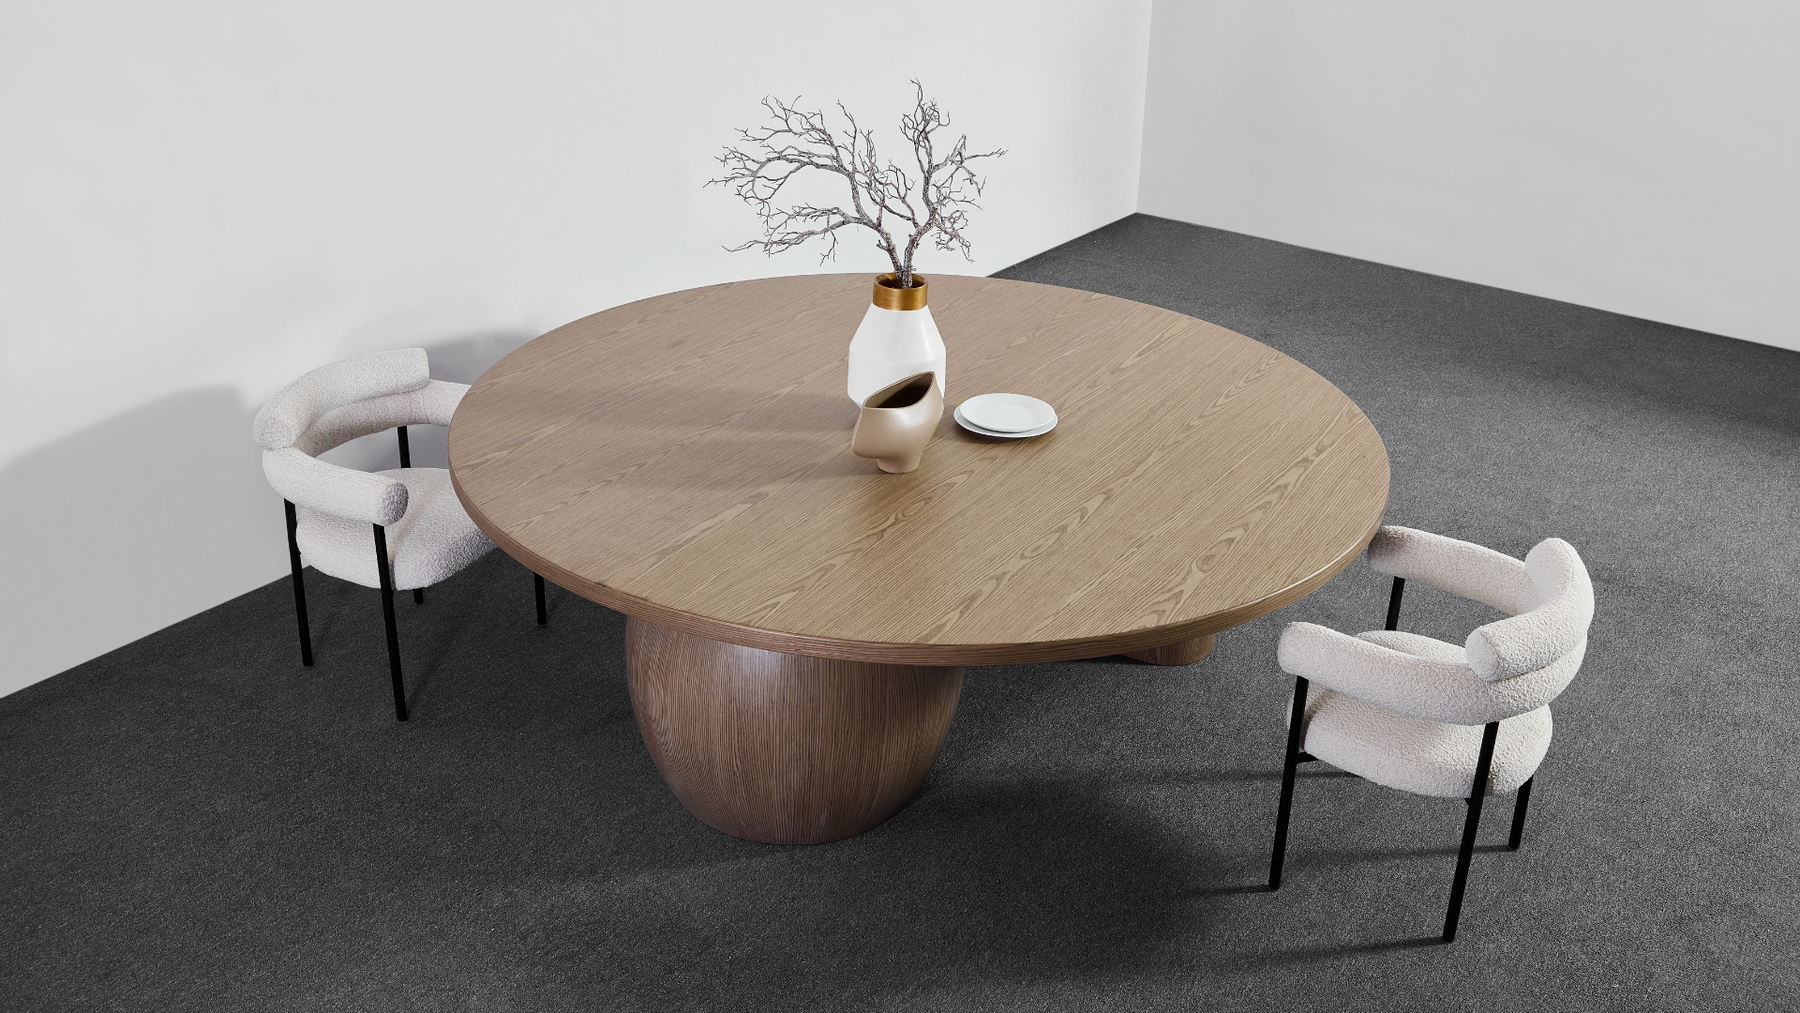 Orb Timber Dining Table with 2 Cassandra Ivory Boucle Dining Chairs Top View in a Room Setting